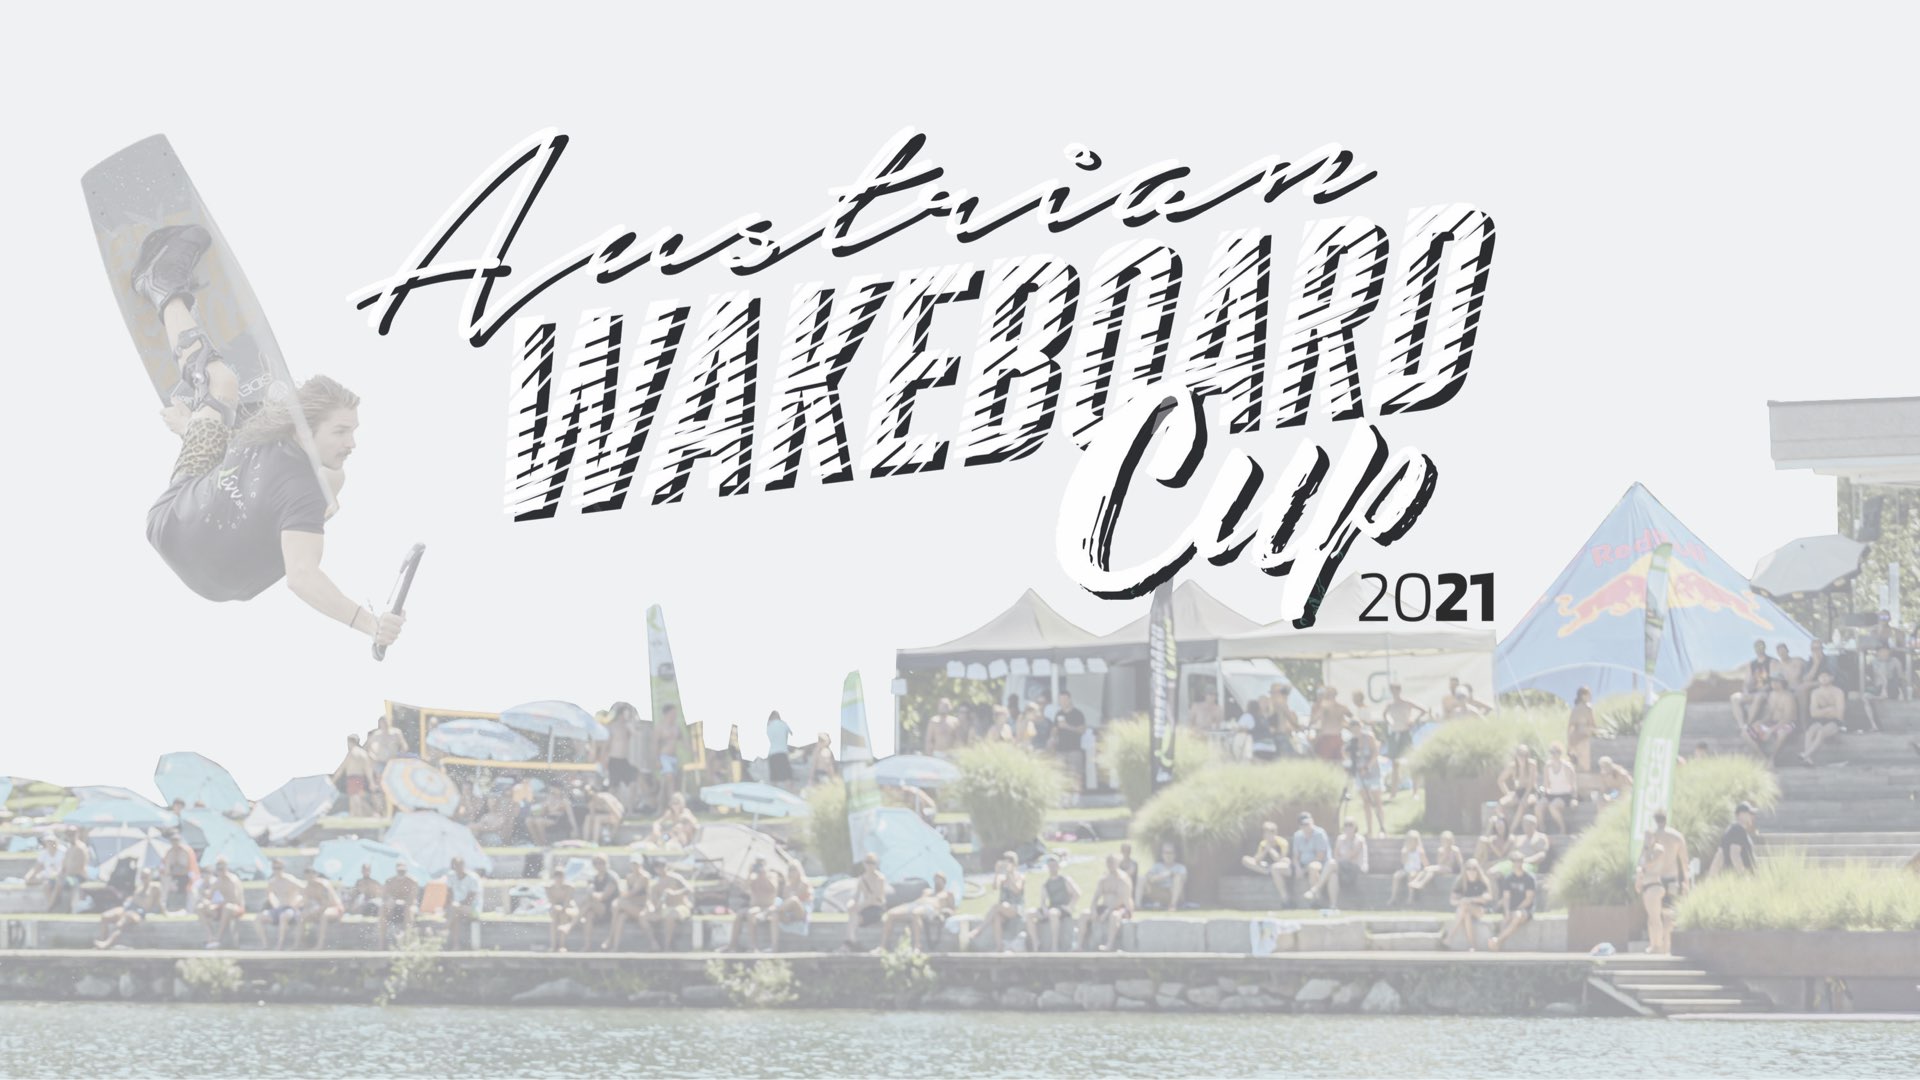 Austrian Wakeboard Cup 2.0: Boat